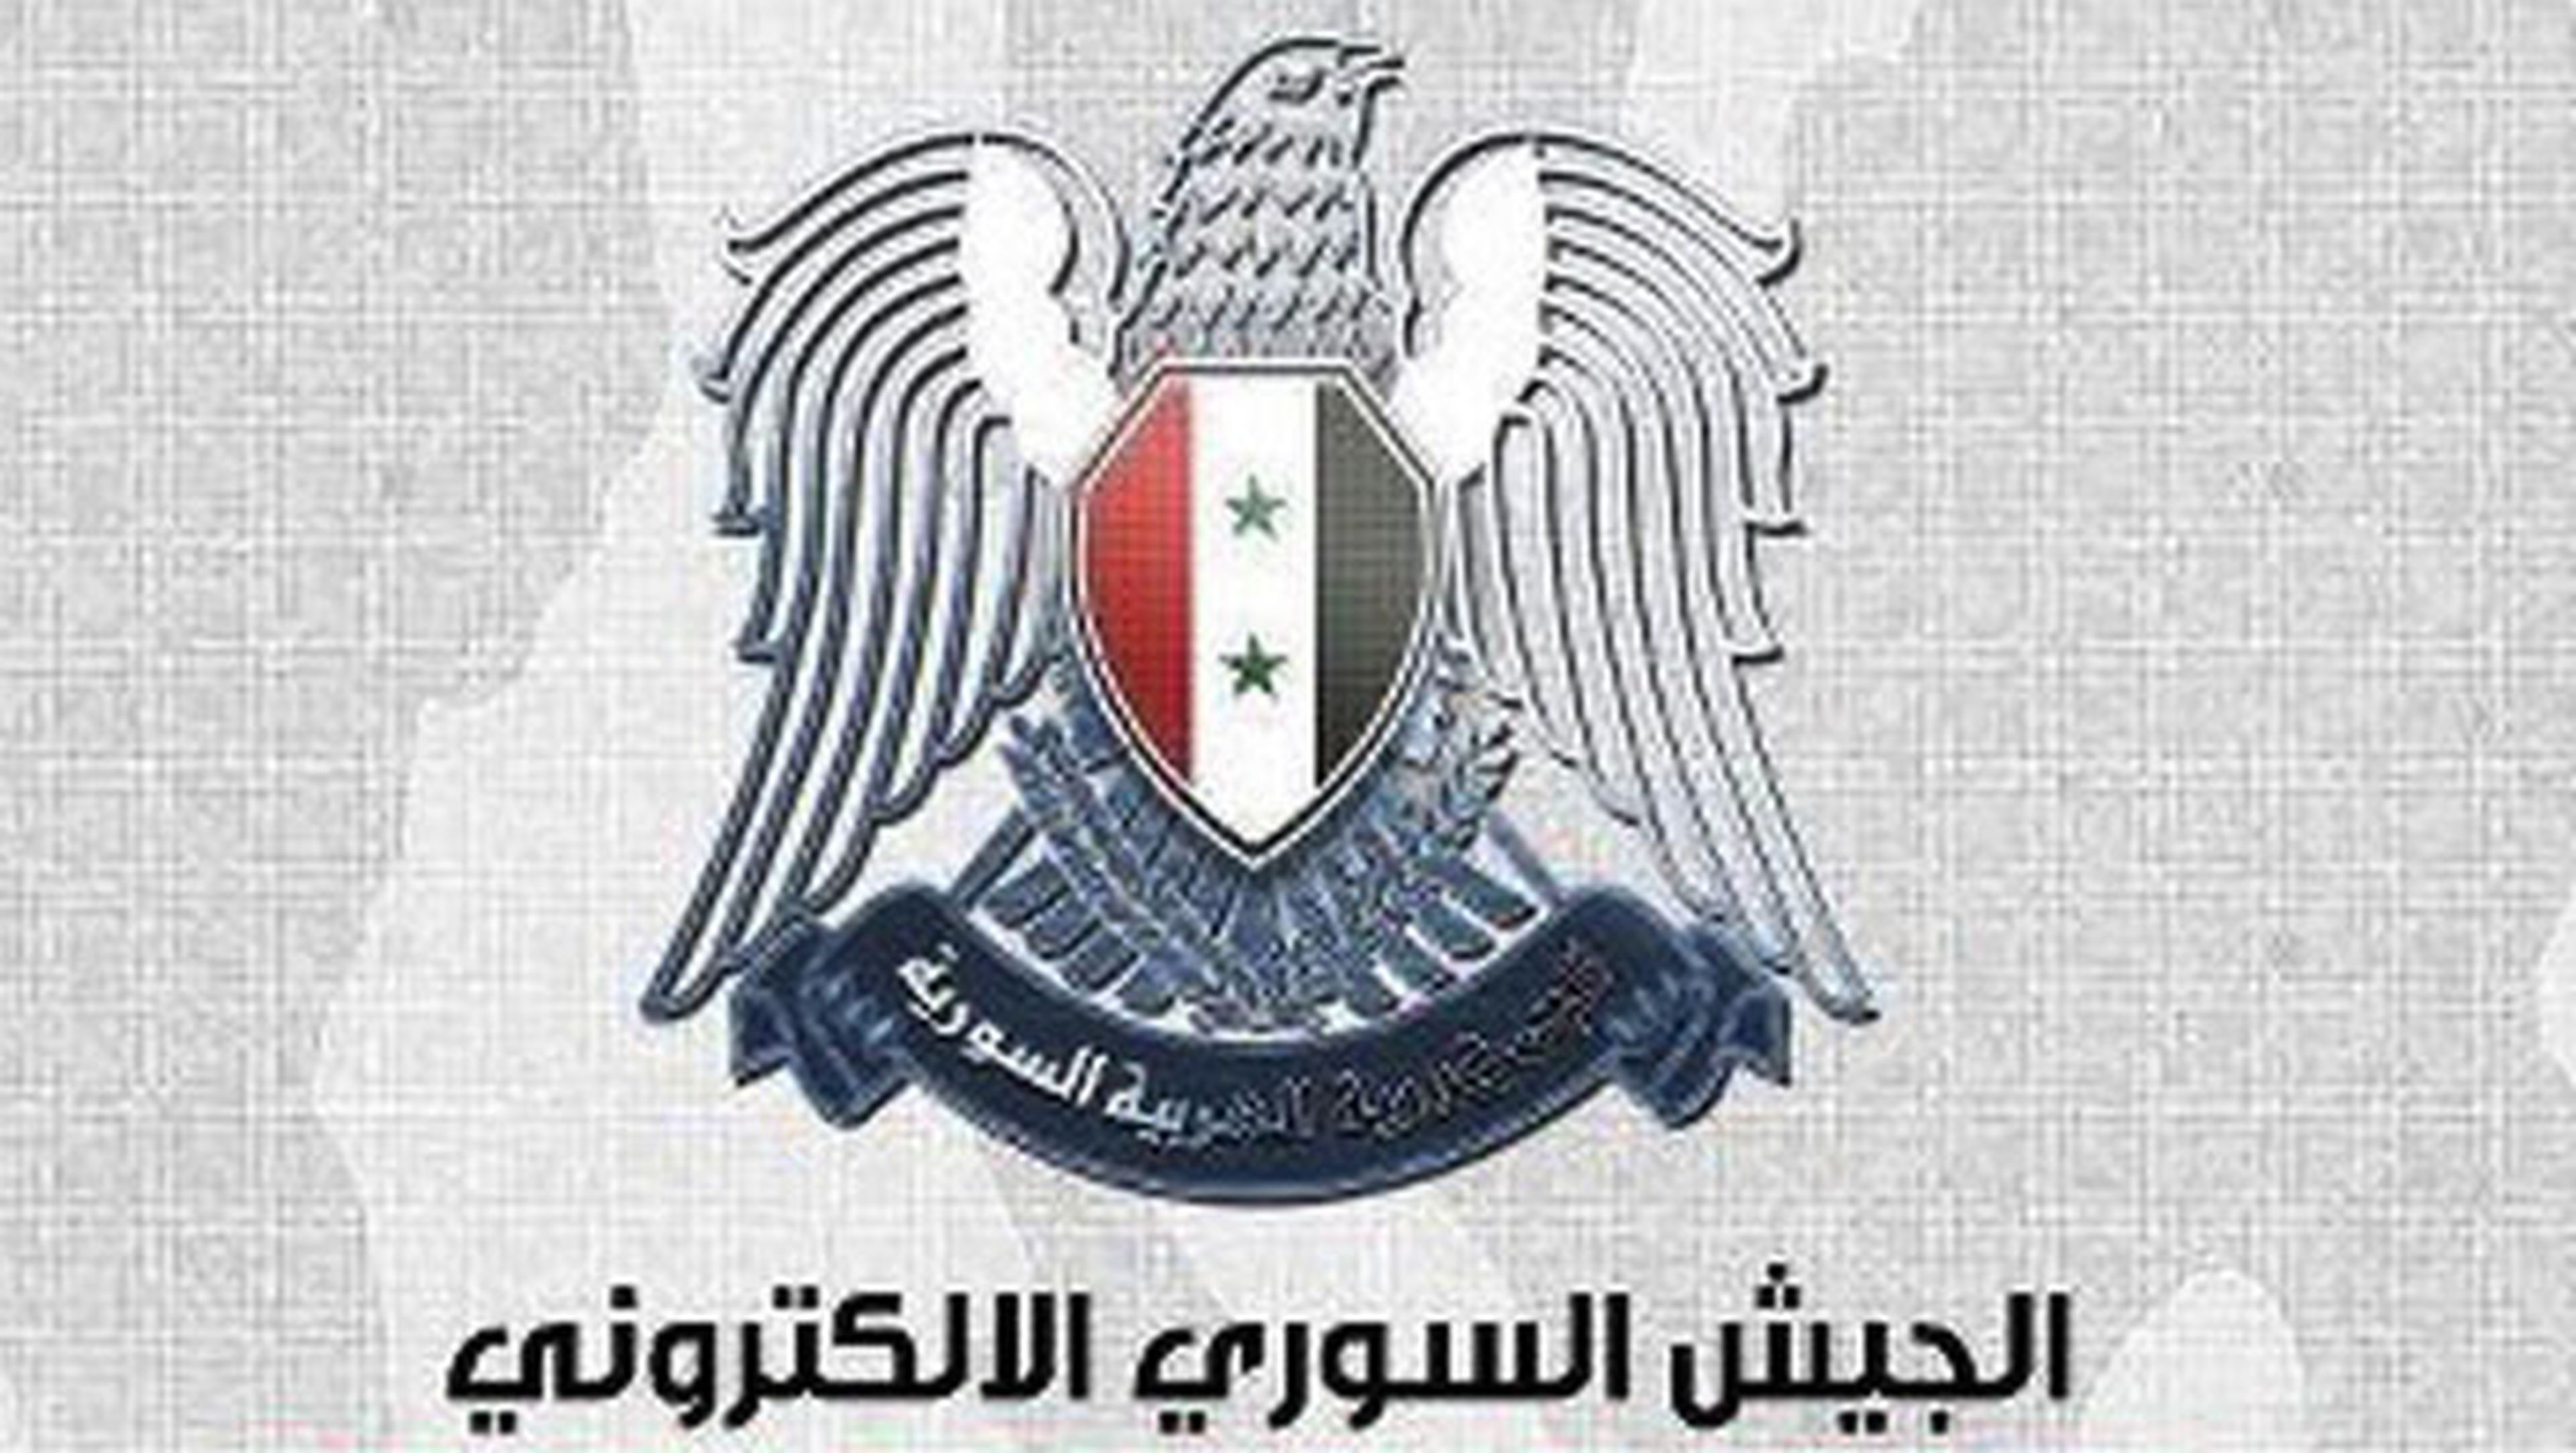 Syrian Electronic Army grupos hackers famosos